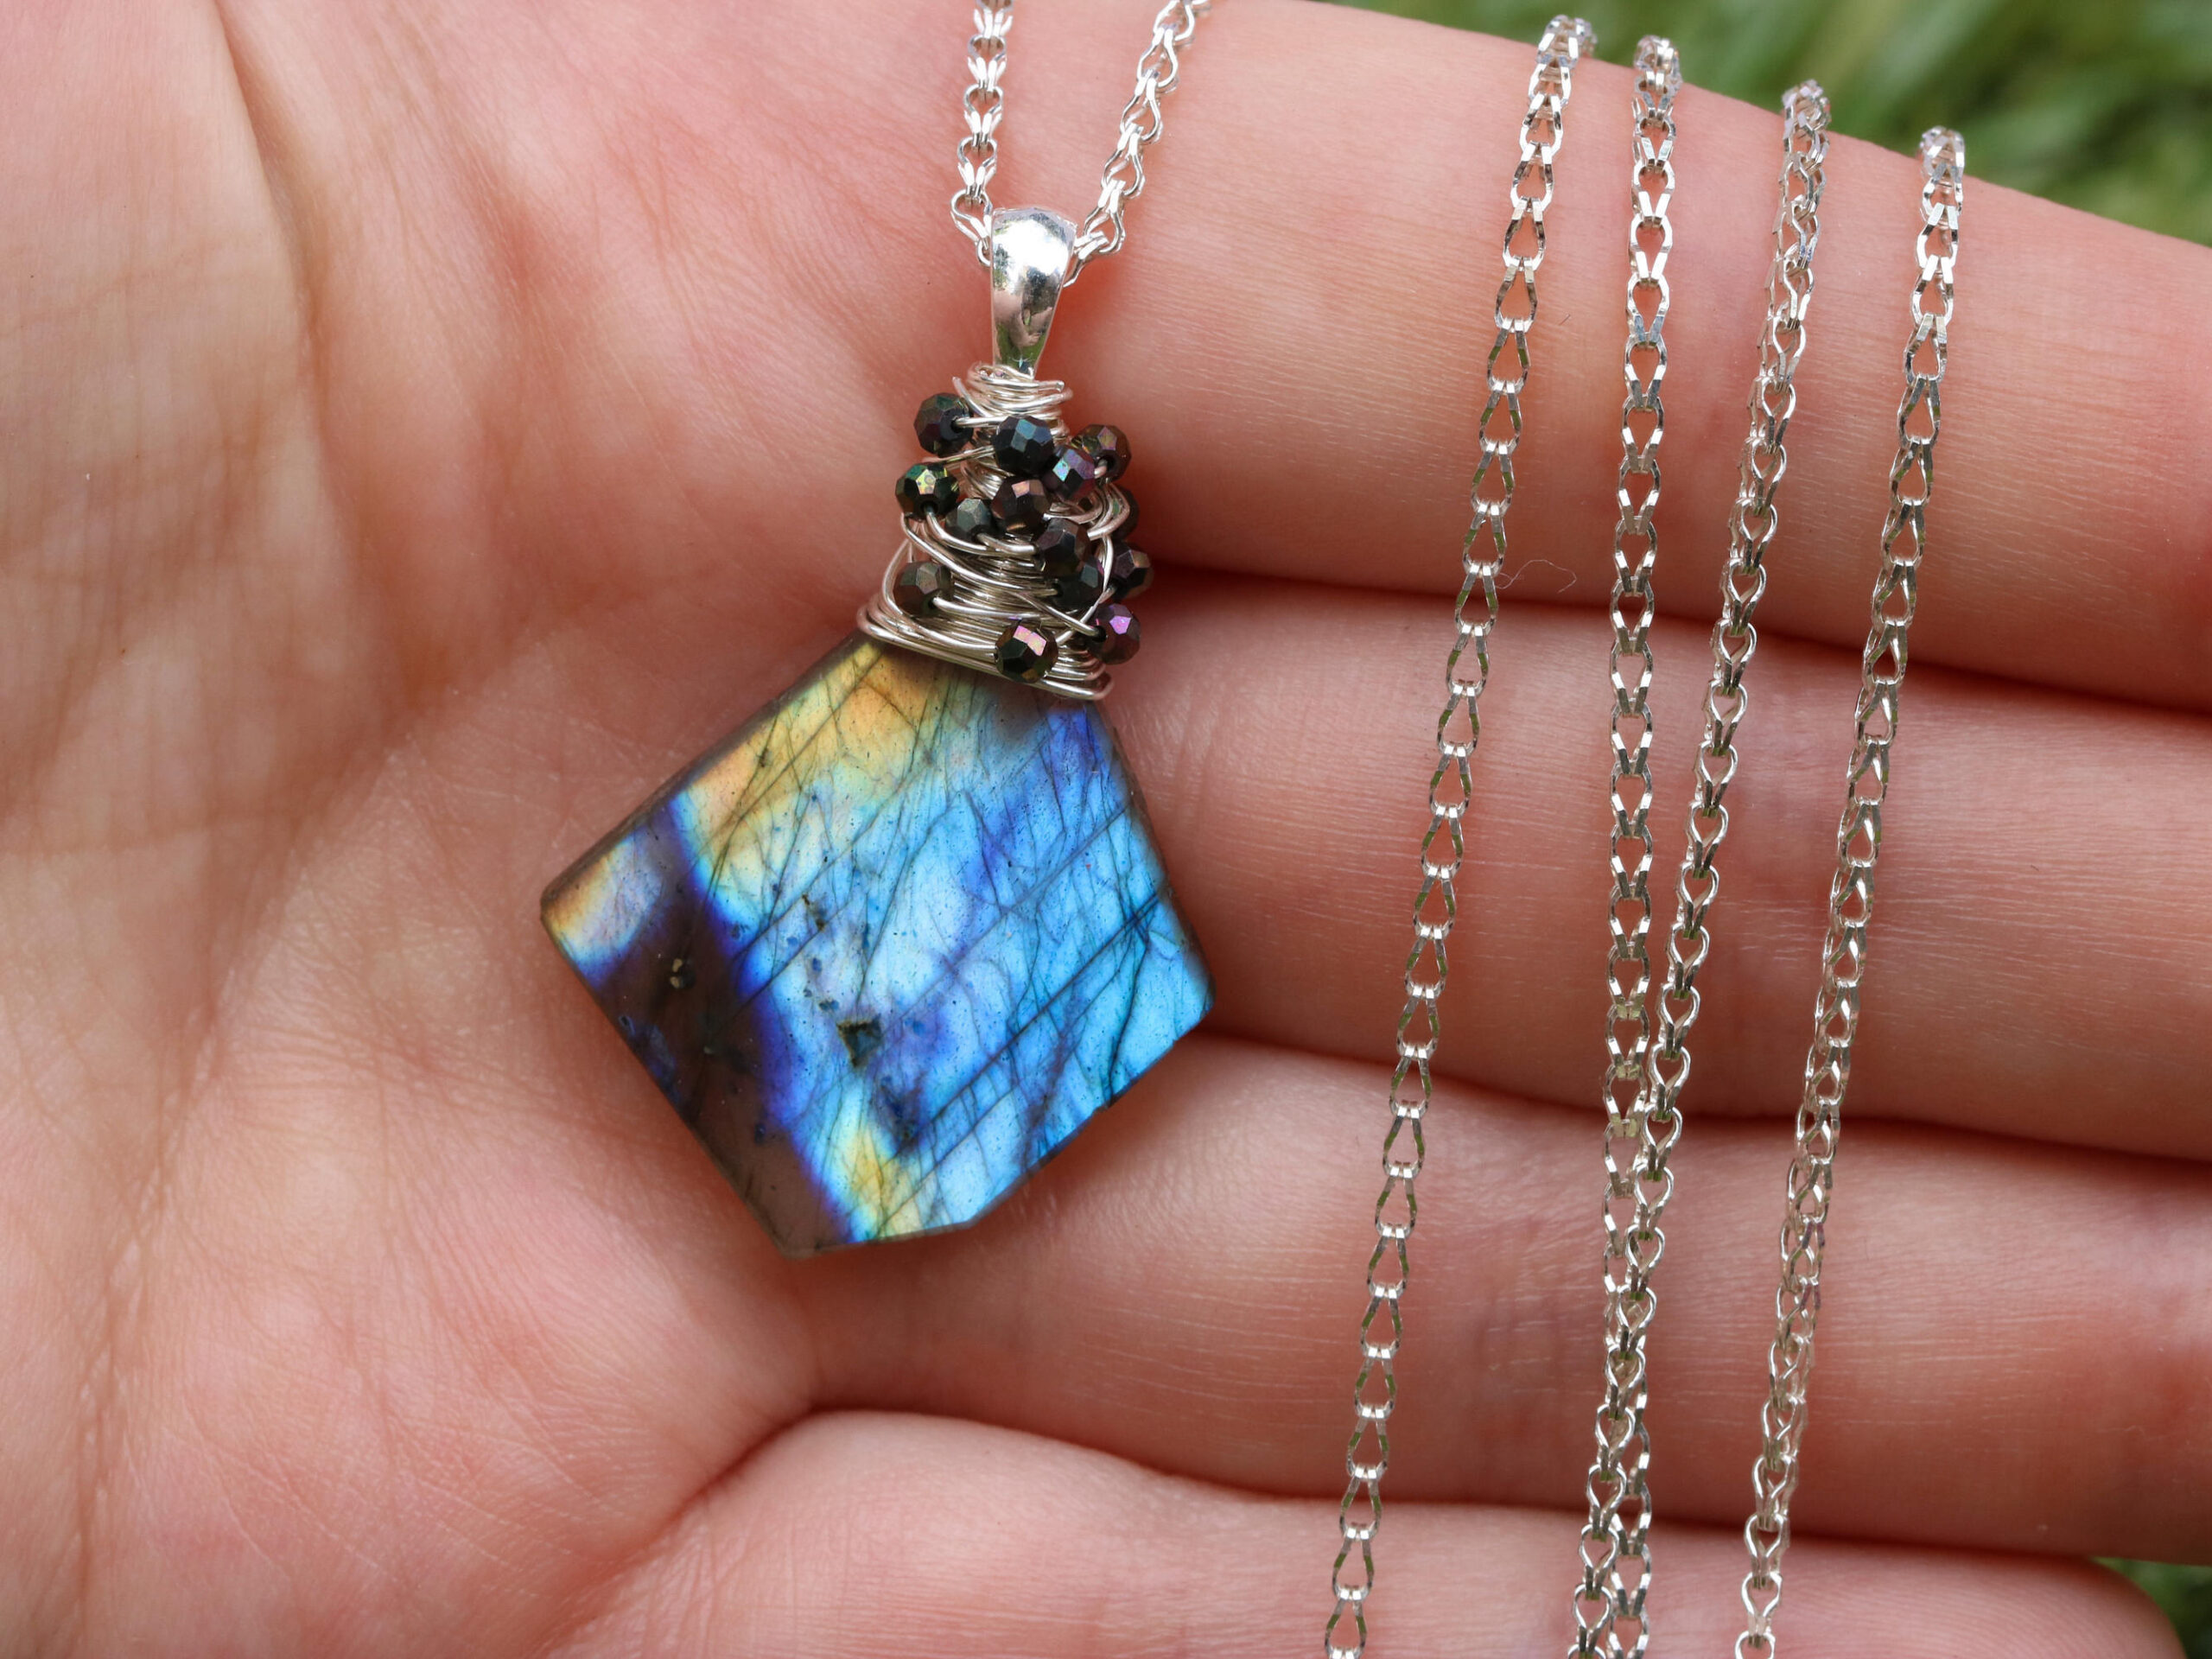 Yellow Blue Labradorite Wire Wrapped in Silver Pendant Necklace